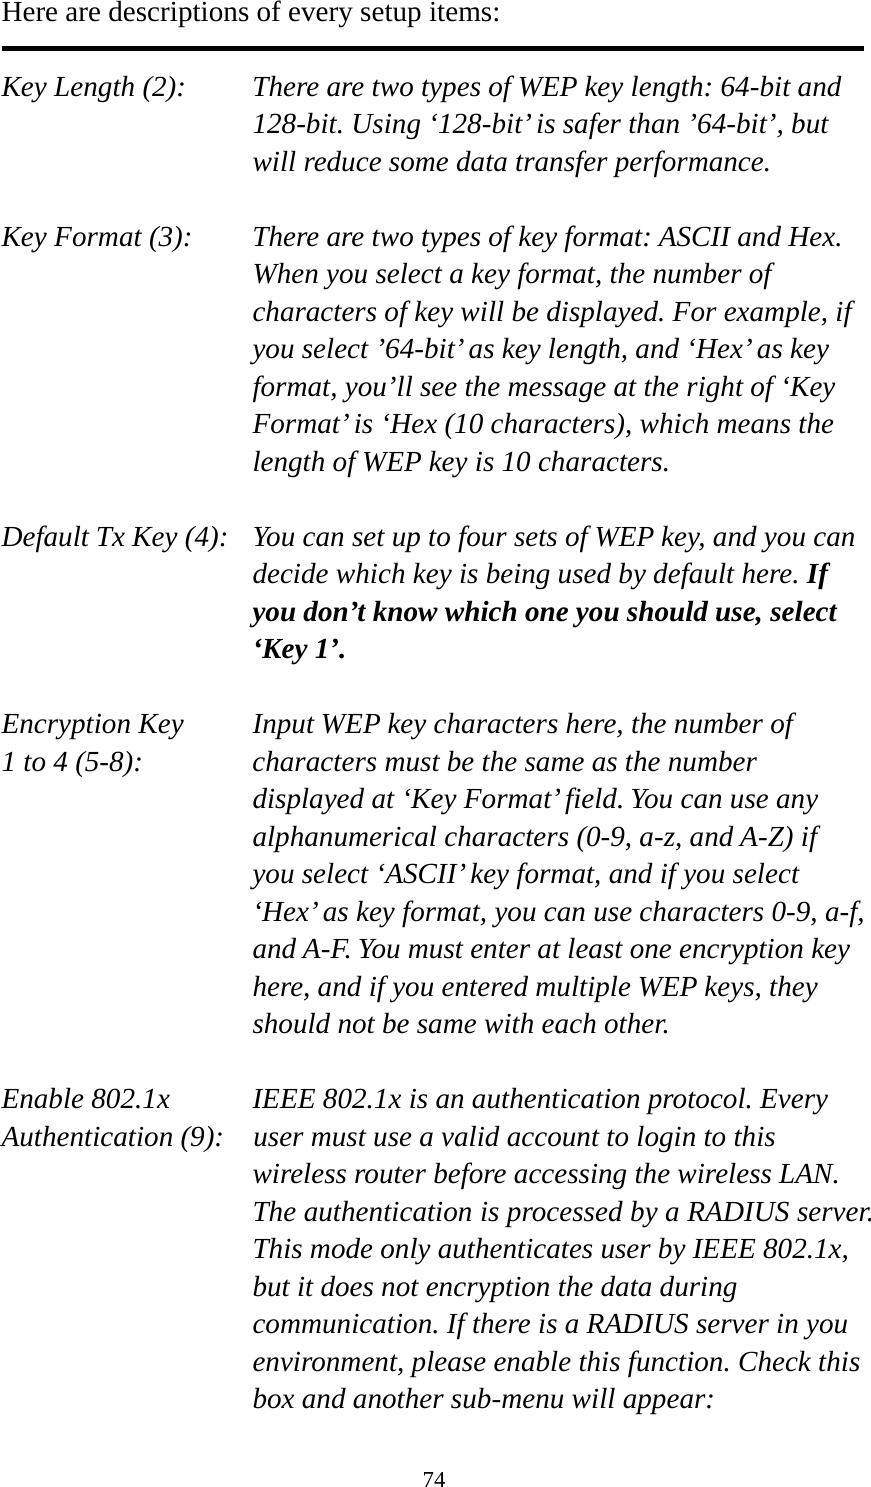 74 Here are descriptions of every setup items:  Key Length (2):    There are two types of WEP key length: 64-bit and 128-bit. Using ‘128-bit’ is safer than ’64-bit’, but will reduce some data transfer performance.  Key Format (3):    There are two types of key format: ASCII and Hex. When you select a key format, the number of characters of key will be displayed. For example, if you select ’64-bit’ as key length, and ‘Hex’ as key format, you’ll see the message at the right of ‘Key Format’ is ‘Hex (10 characters), which means the length of WEP key is 10 characters.  Default Tx Key (4):   You can set up to four sets of WEP key, and you can decide which key is being used by default here. If you don’t know which one you should use, select ‘Key 1’.  Encryption Key     Input WEP key characters here, the number of 1 to 4 (5-8):    characters must be the same as the number displayed at ‘Key Format’ field. You can use any alphanumerical characters (0-9, a-z, and A-Z) if you select ‘ASCII’ key format, and if you select ‘Hex’ as key format, you can use characters 0-9, a-f, and A-F. You must enter at least one encryption key here, and if you entered multiple WEP keys, they should not be same with each other.  Enable 802.1x  IEEE 802.1x is an authentication protocol. Every   Authentication (9):    user must use a valid account to login to this wireless router before accessing the wireless LAN. The authentication is processed by a RADIUS server. This mode only authenticates user by IEEE 802.1x, but it does not encryption the data during communication. If there is a RADIUS server in you environment, please enable this function. Check this box and another sub-menu will appear: 